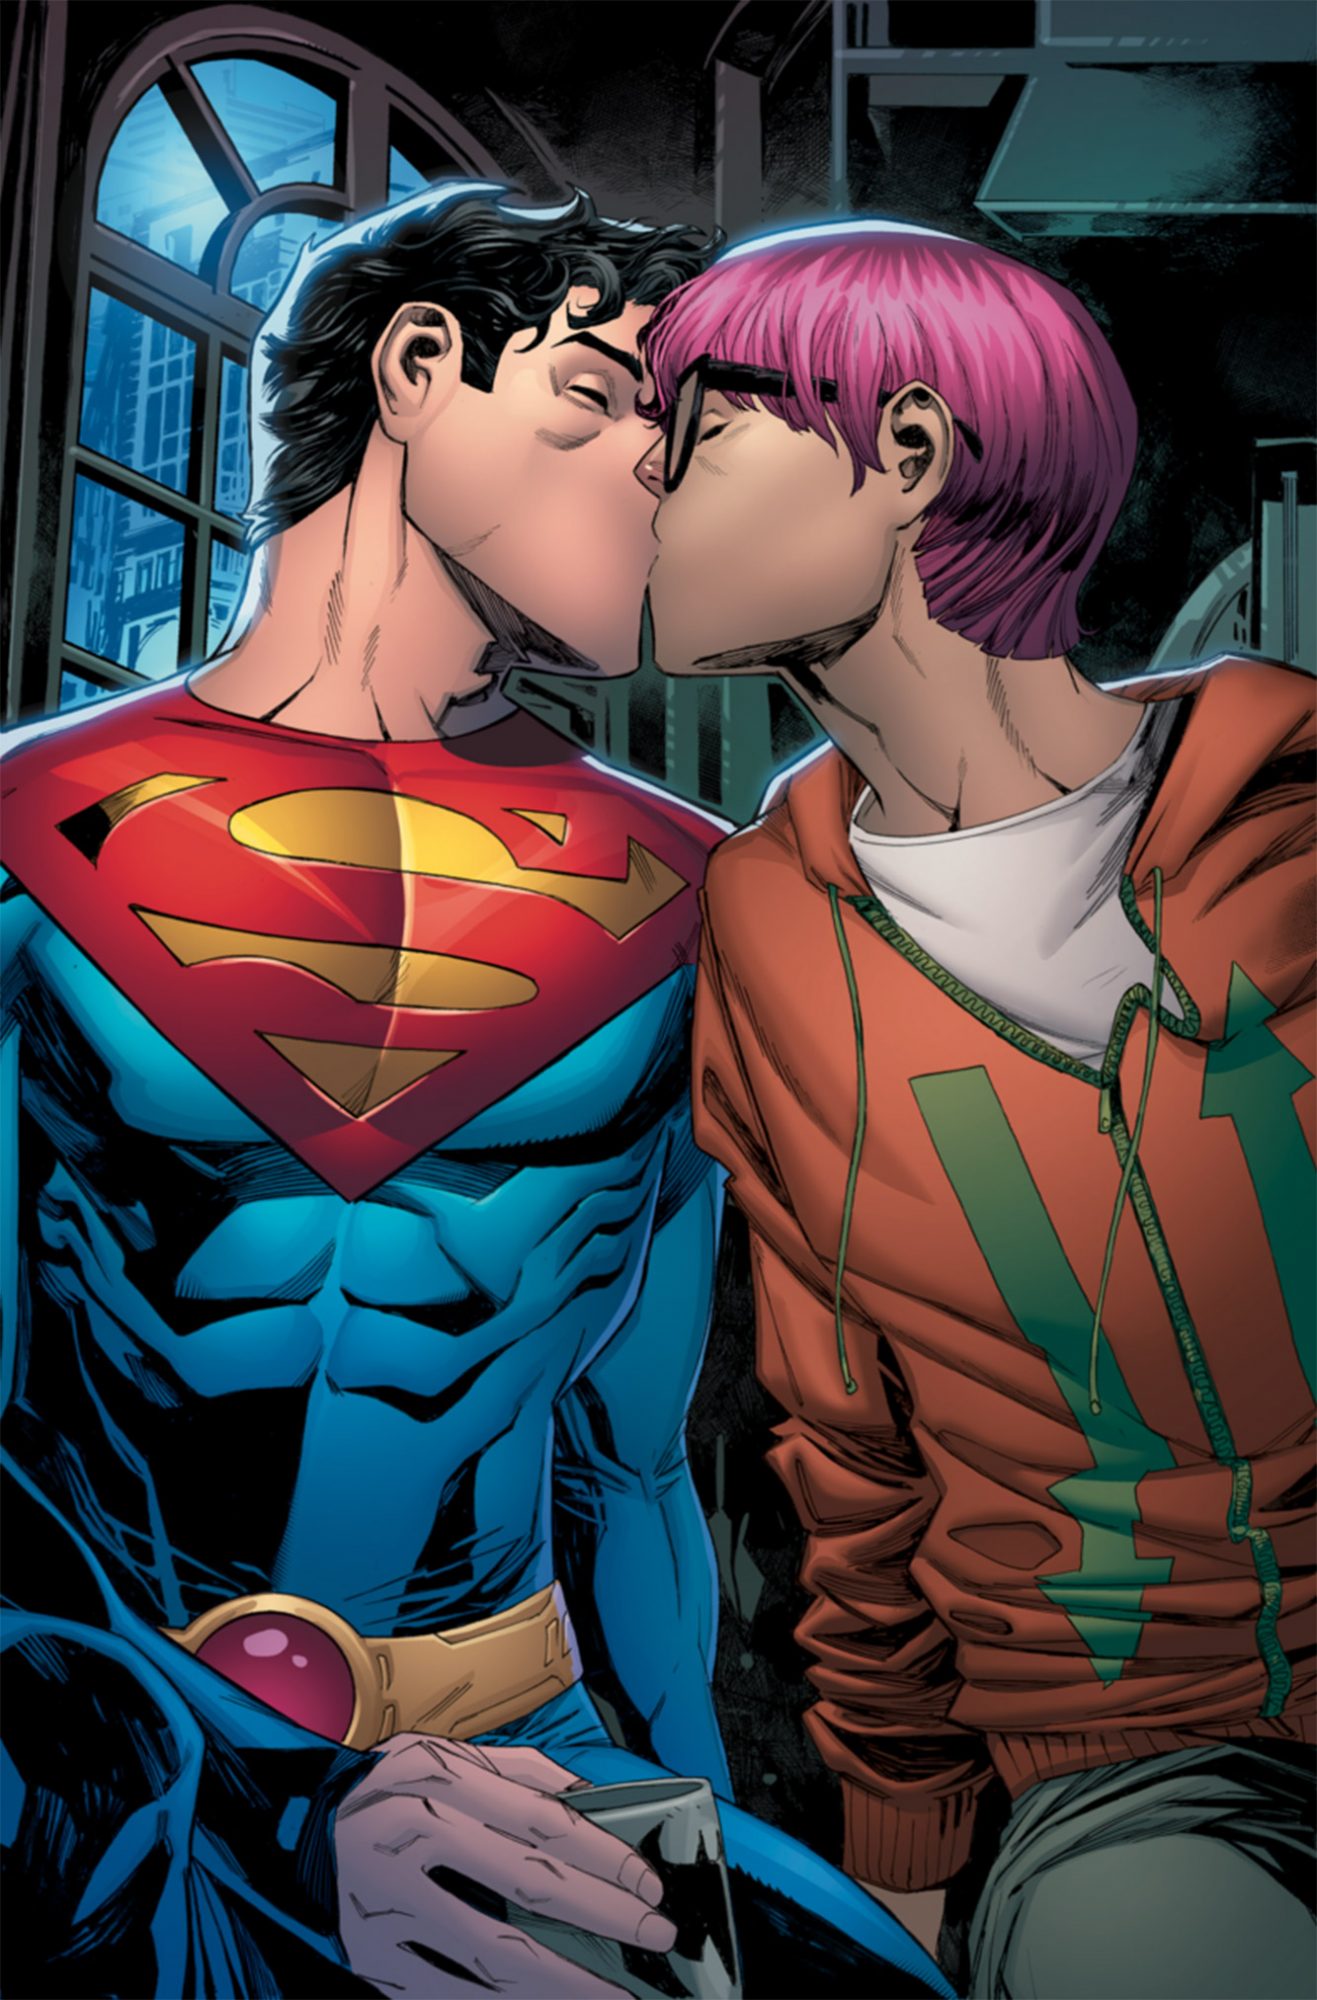 Superman’s son, comes out as Bisexual in new comic